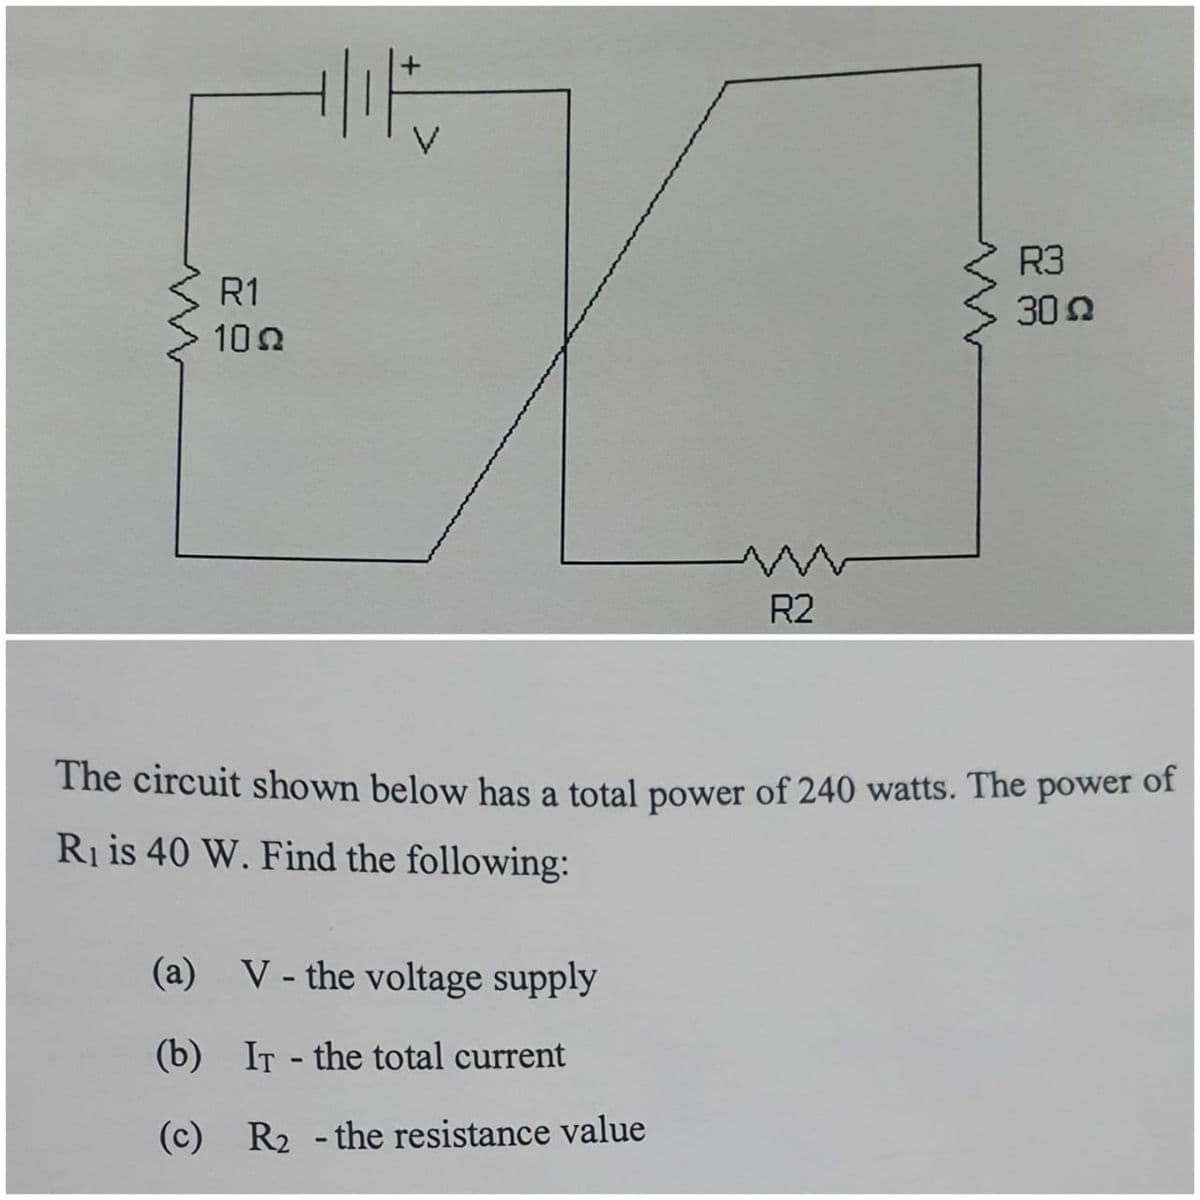 R3
R1
30 0
102
R2
The circuit shown below has a total power of 240 watts. The power of
Ri is 40 W. Find the following:
(a) V - the voltage supply
(b) IT - the total current
(c) R2 - the resistance value
